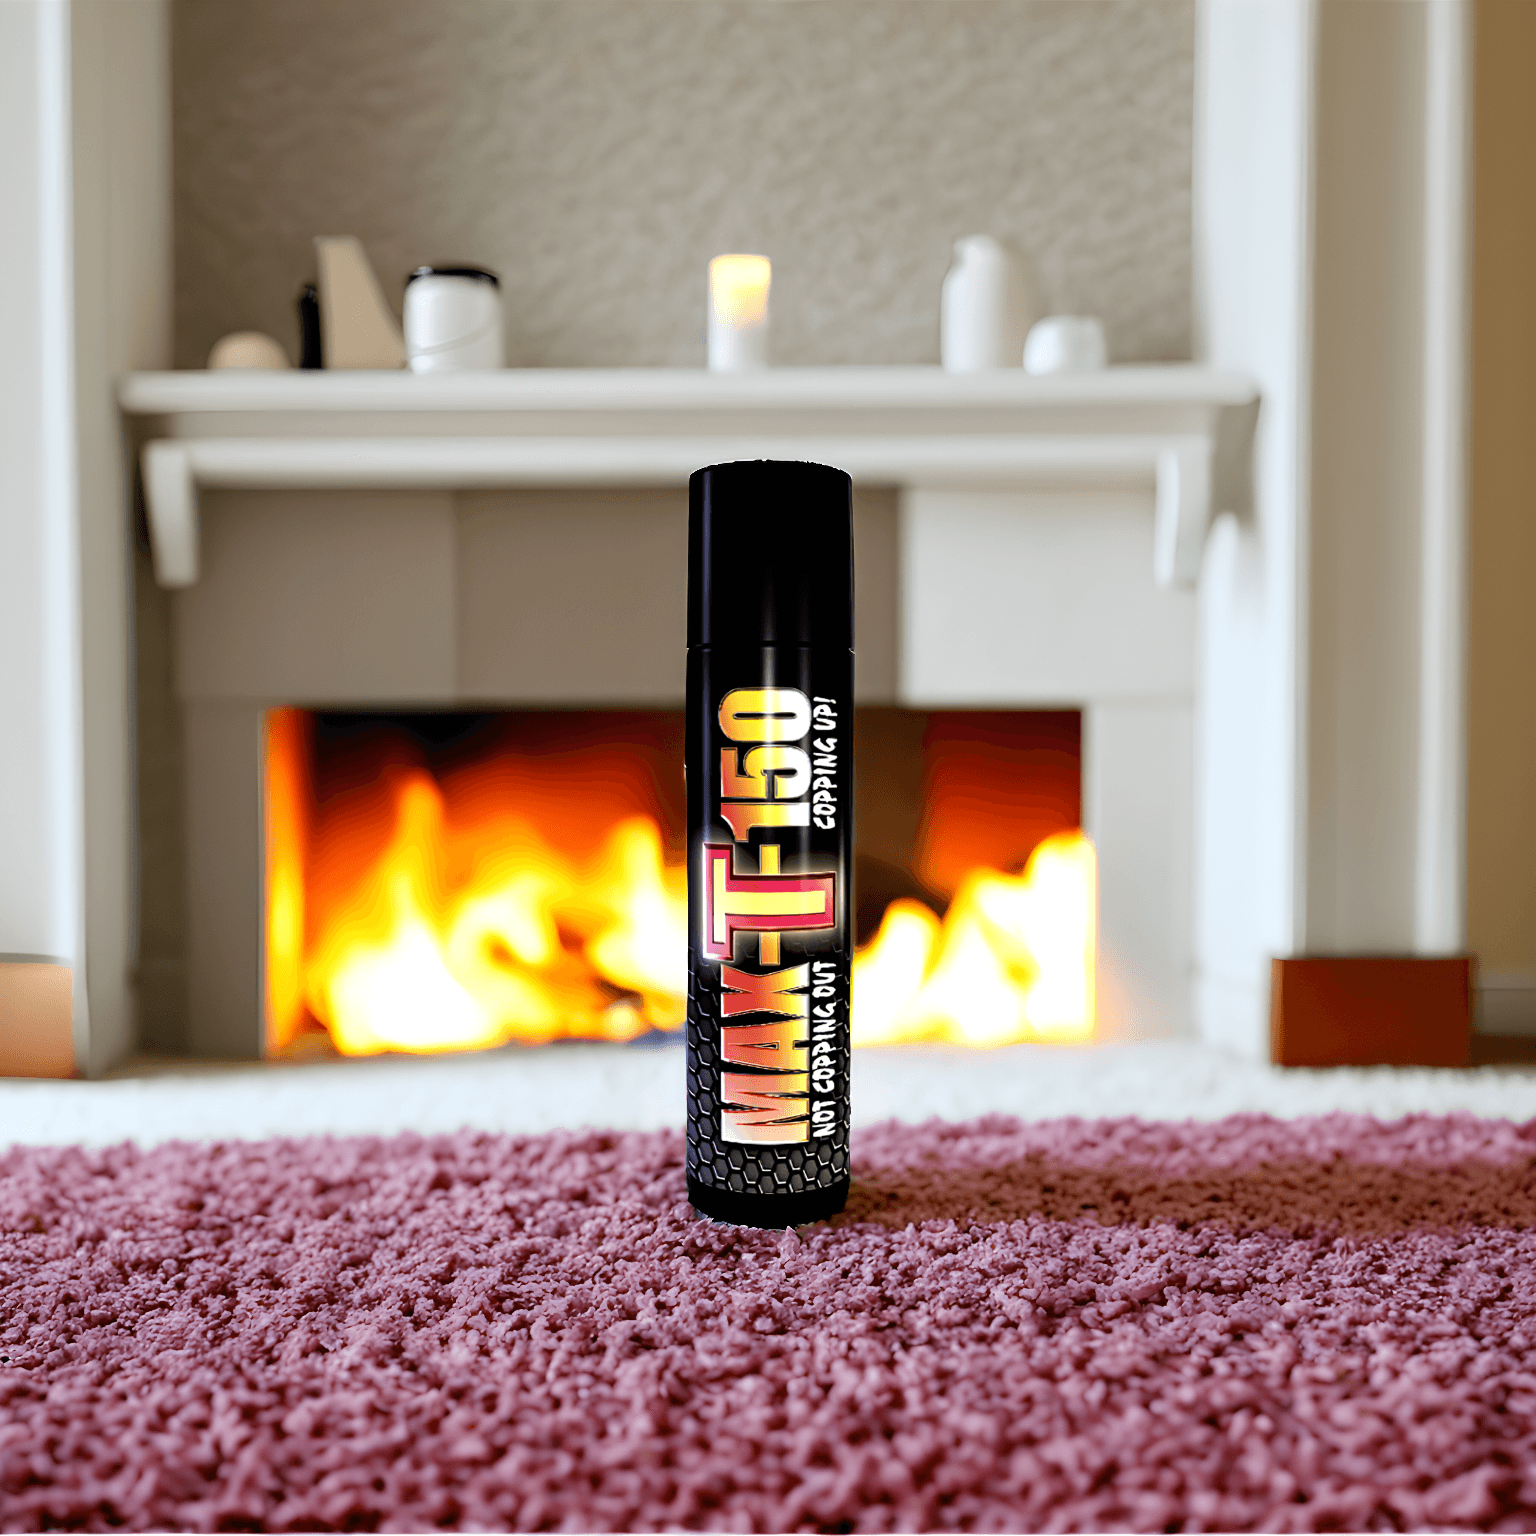 Max-T-150 Copulins Lipbalm Stick by Royal Pheromones, Pheromone Perfumes, Pheromone Oil, Pheromone Colognes, displayed on a carpet in front of a cozy fireplace.